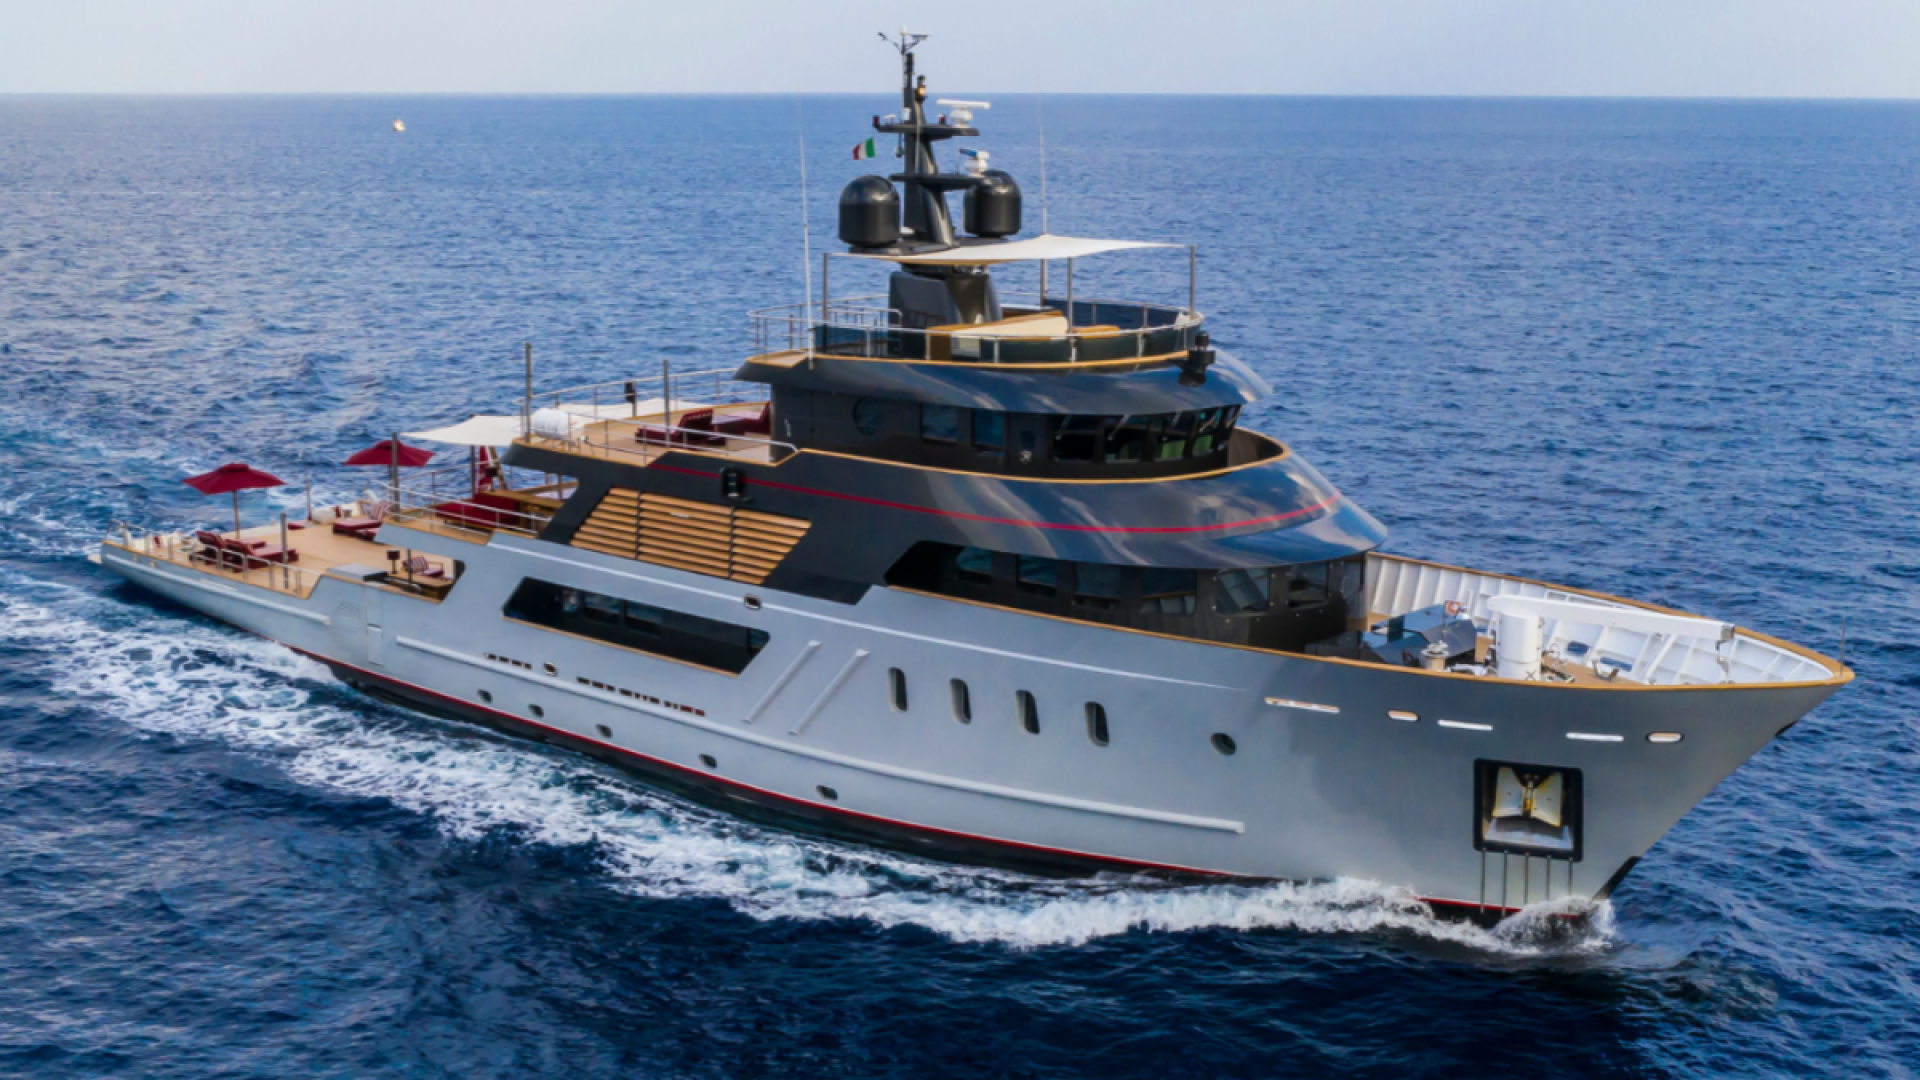 MY Masquenada 51m vince il Best Refitted Yachts Award